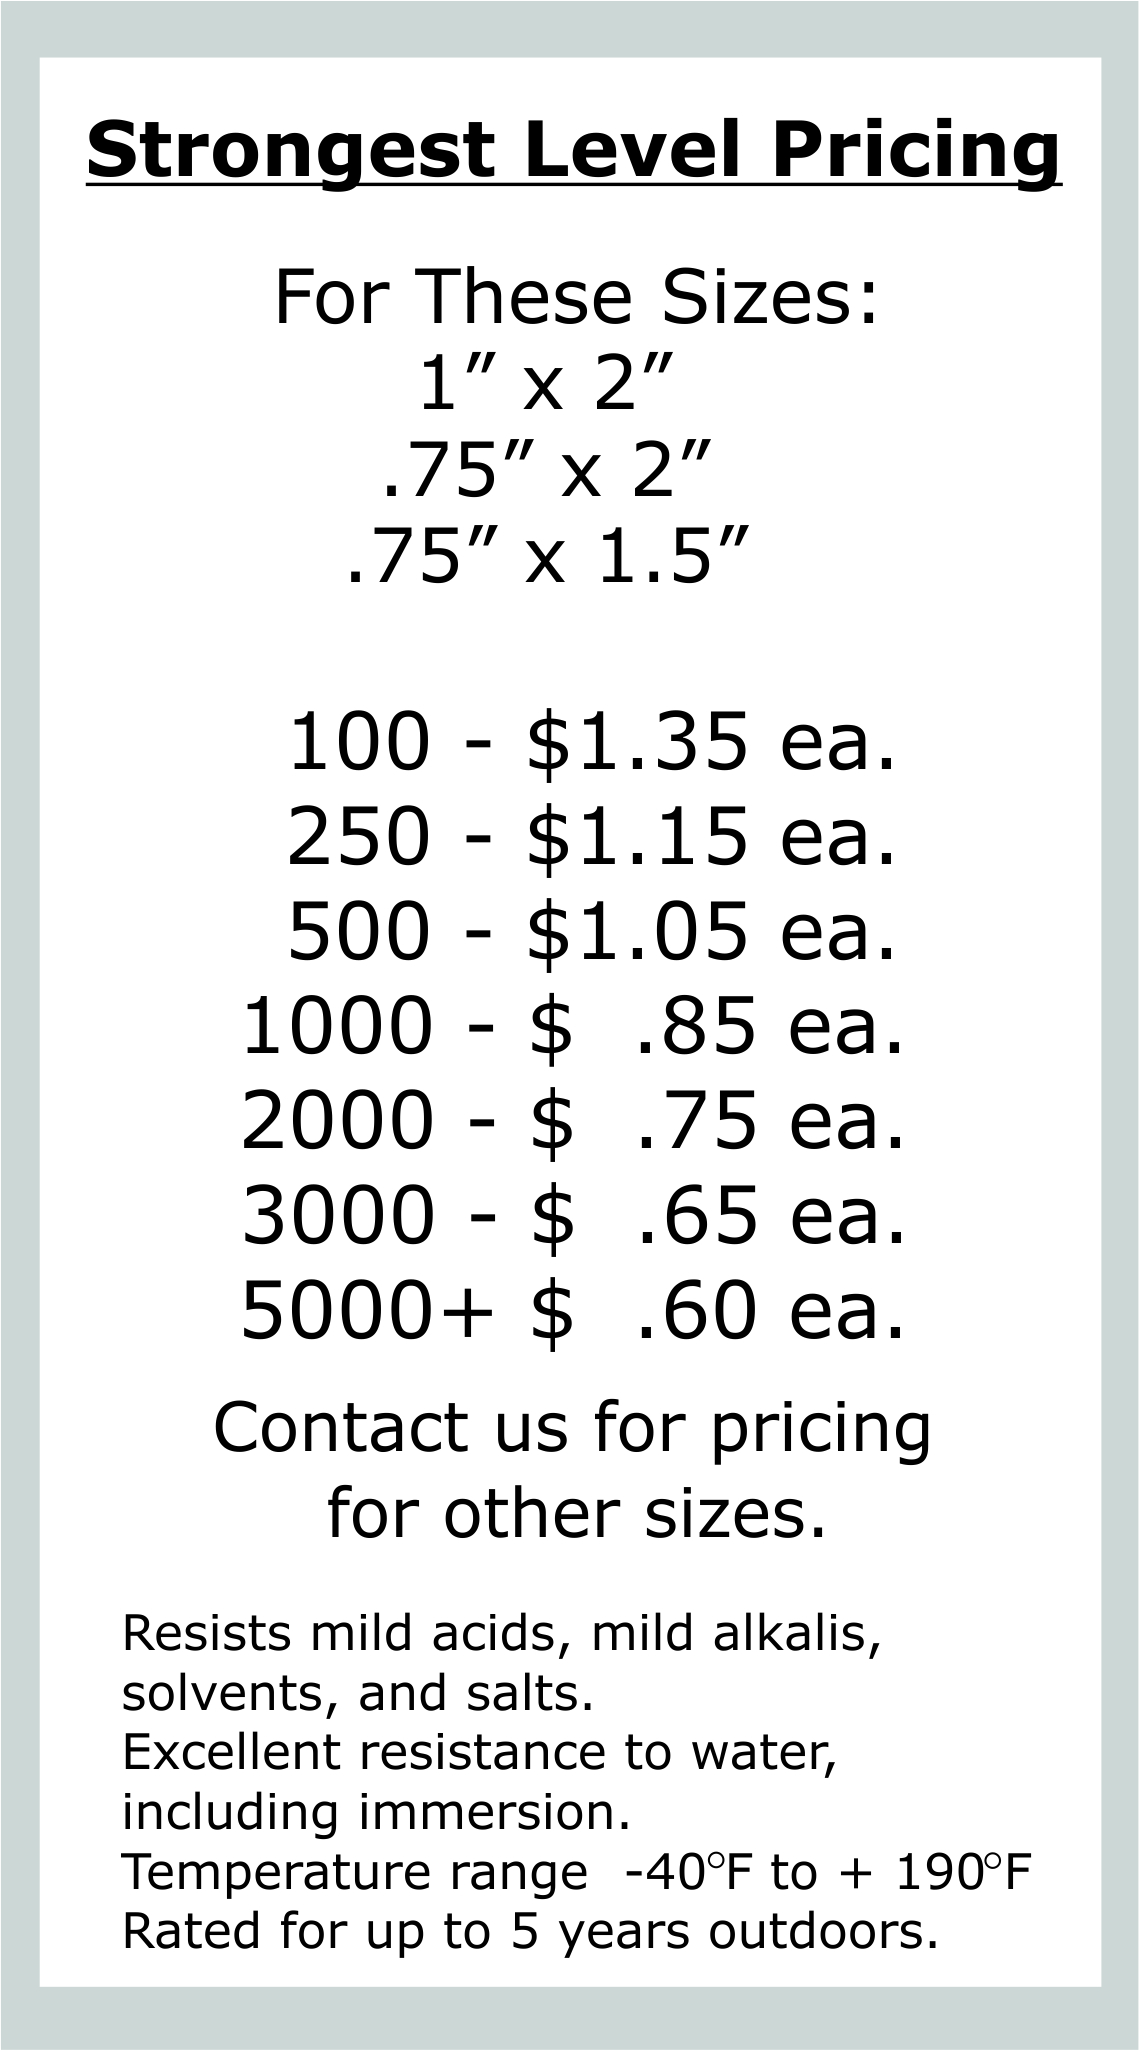 this is the pricing for our strongest level asset tags for computers